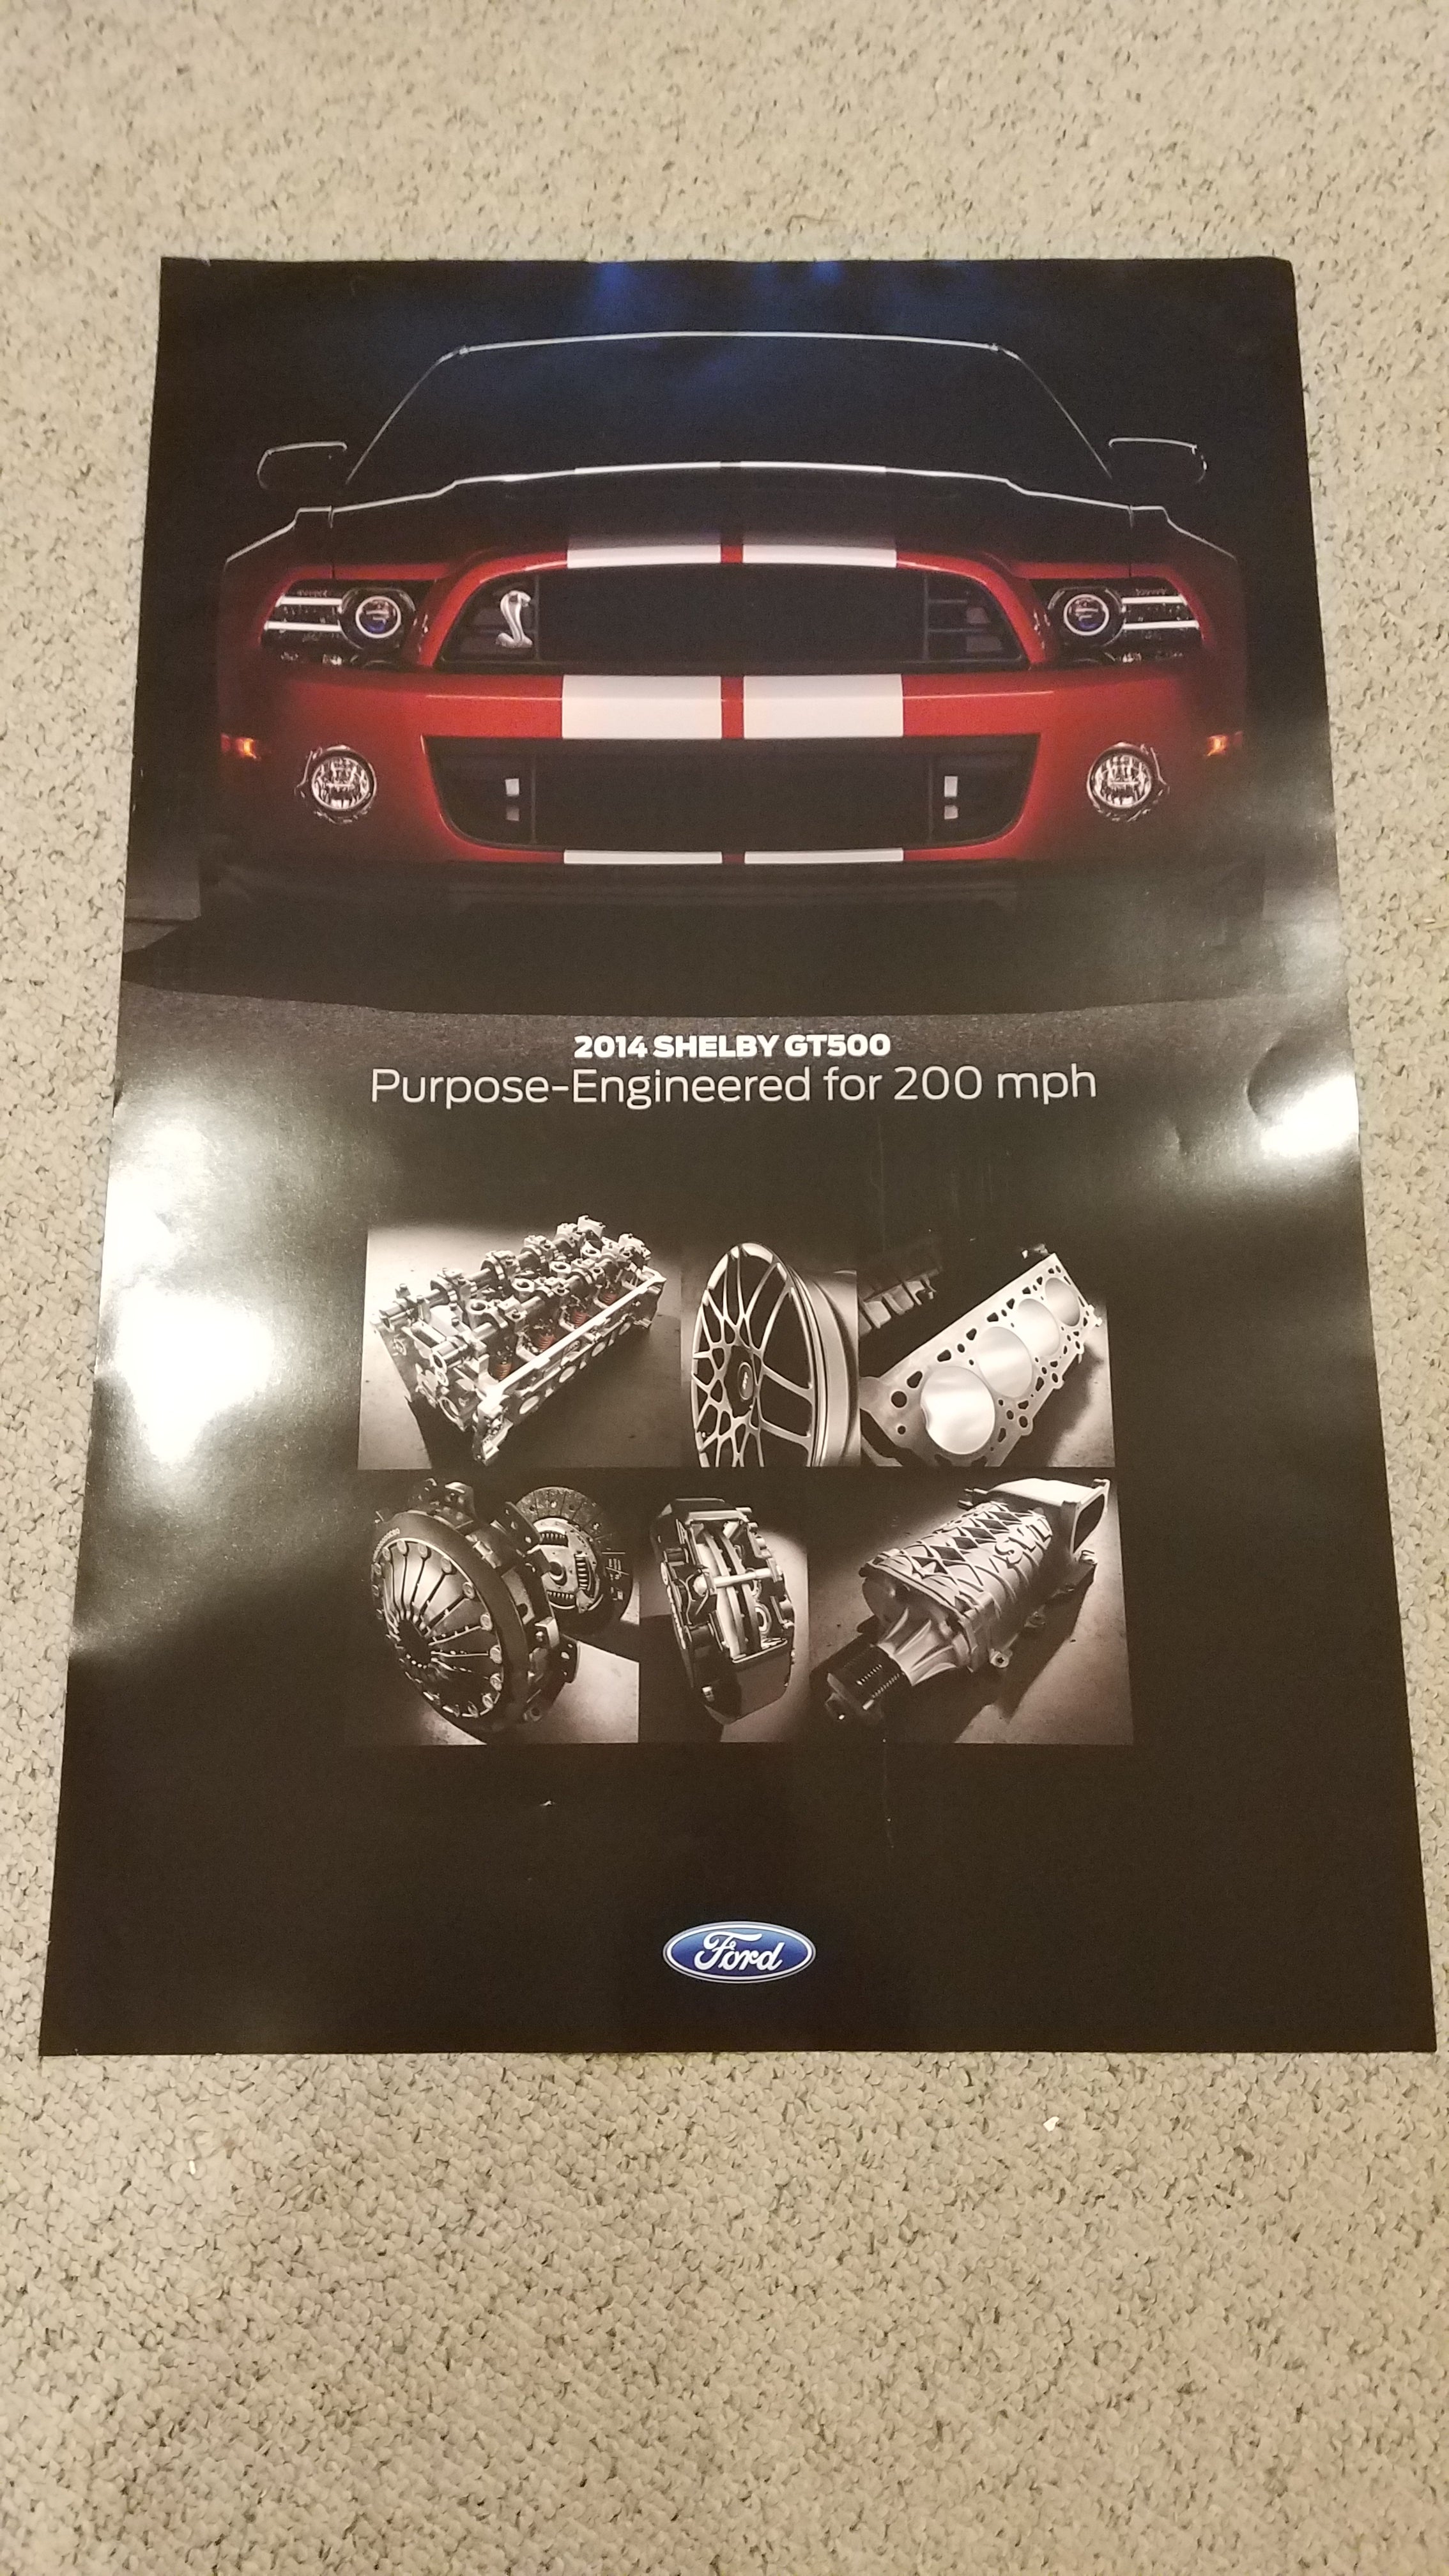 Ford Dealer 2014 Shelby Mustang GT 500 Double Sided Poster 24" x 36"